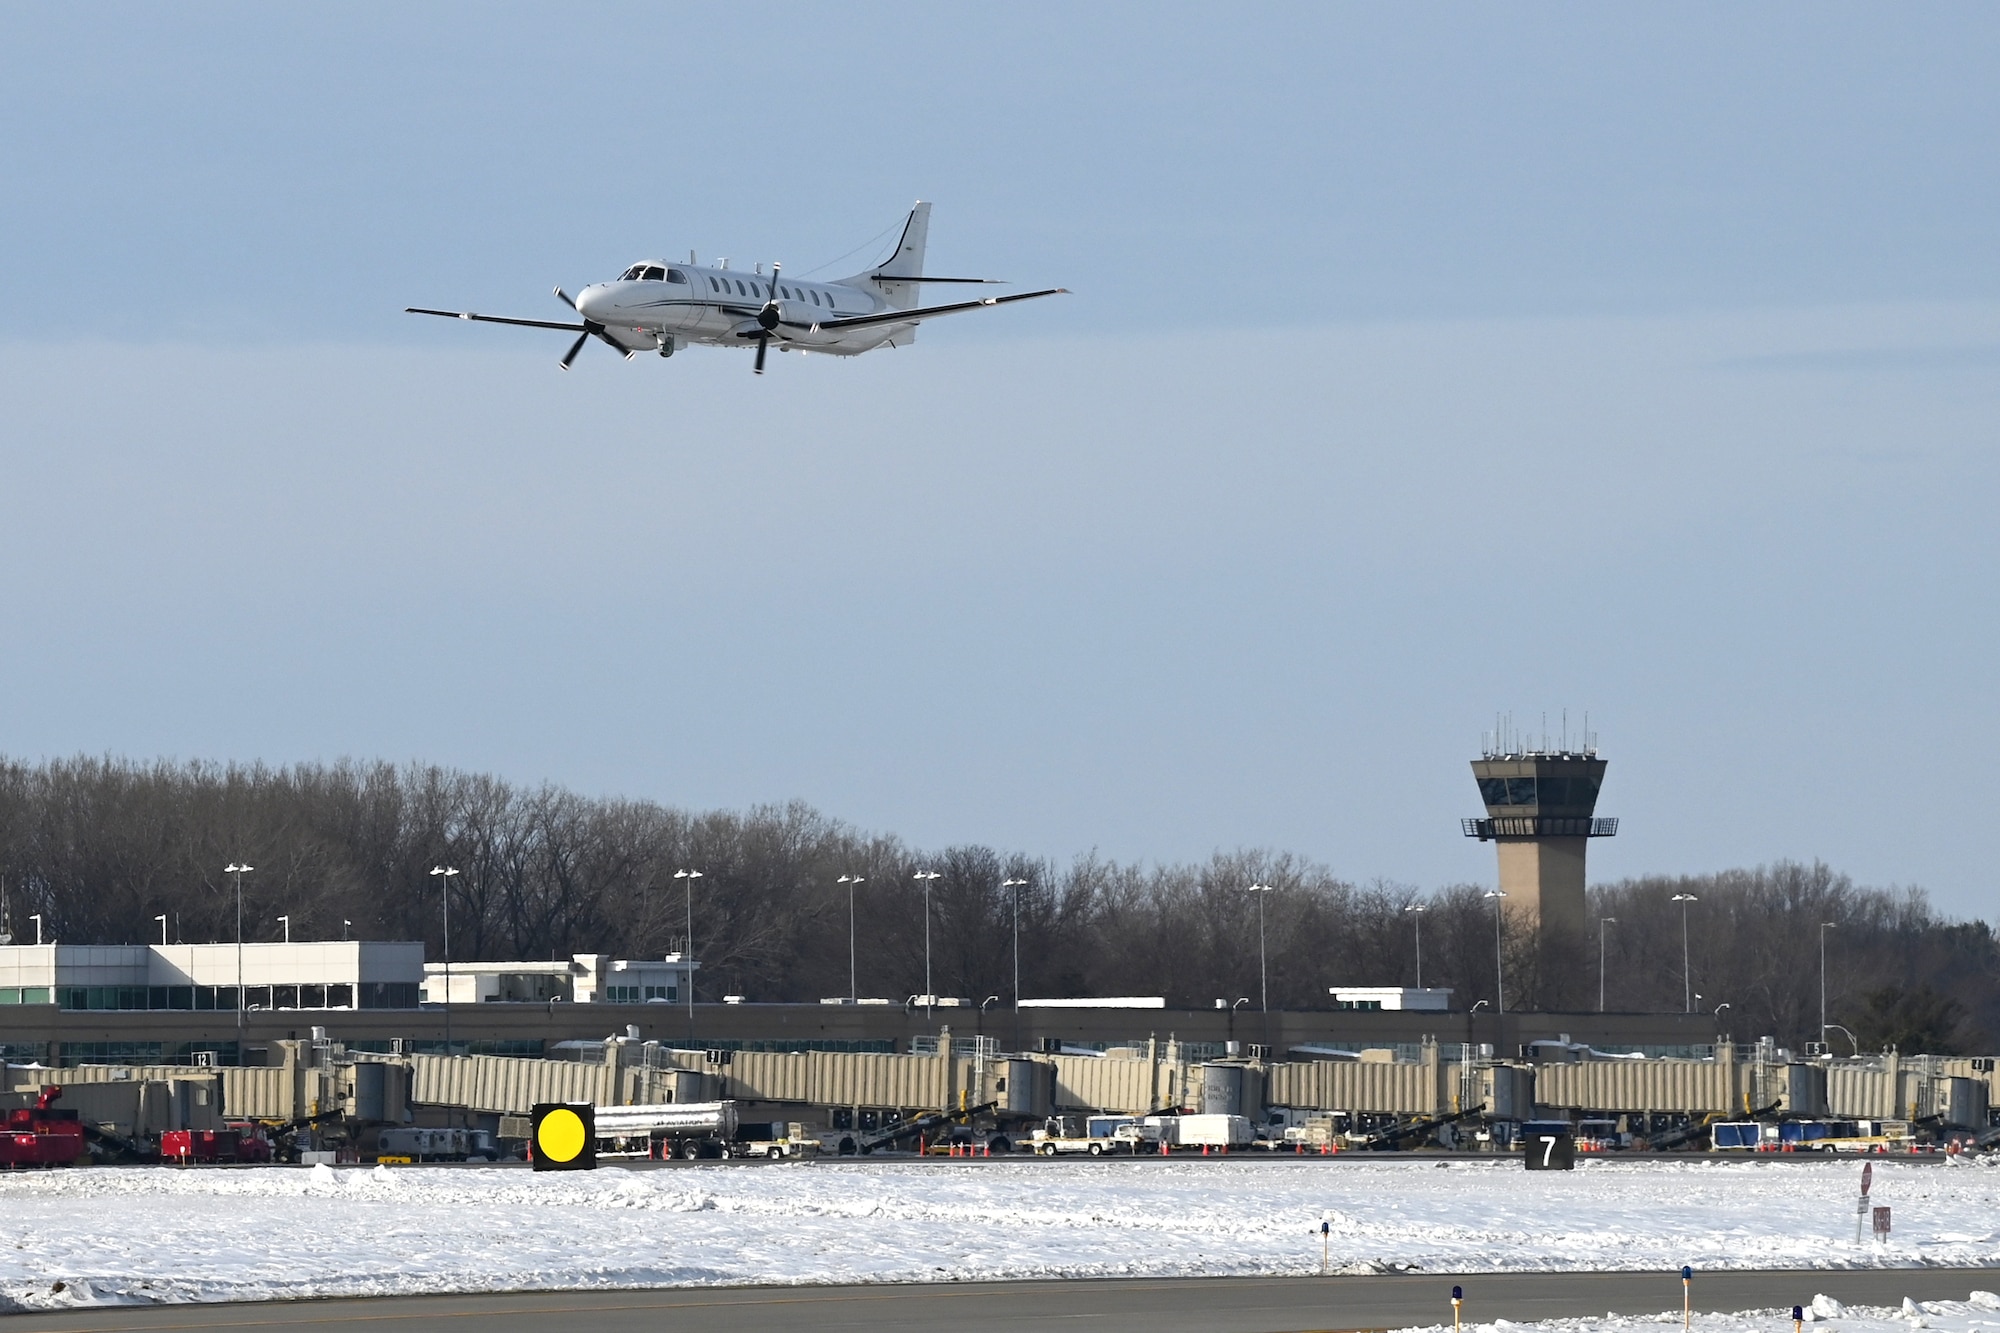 The Wisconsin Air National Guard's RC-26B reconnaissance aircraft makes a final pass over Dane County Regional Airport in Madison, Wisconsin Dec. 28, 2022.